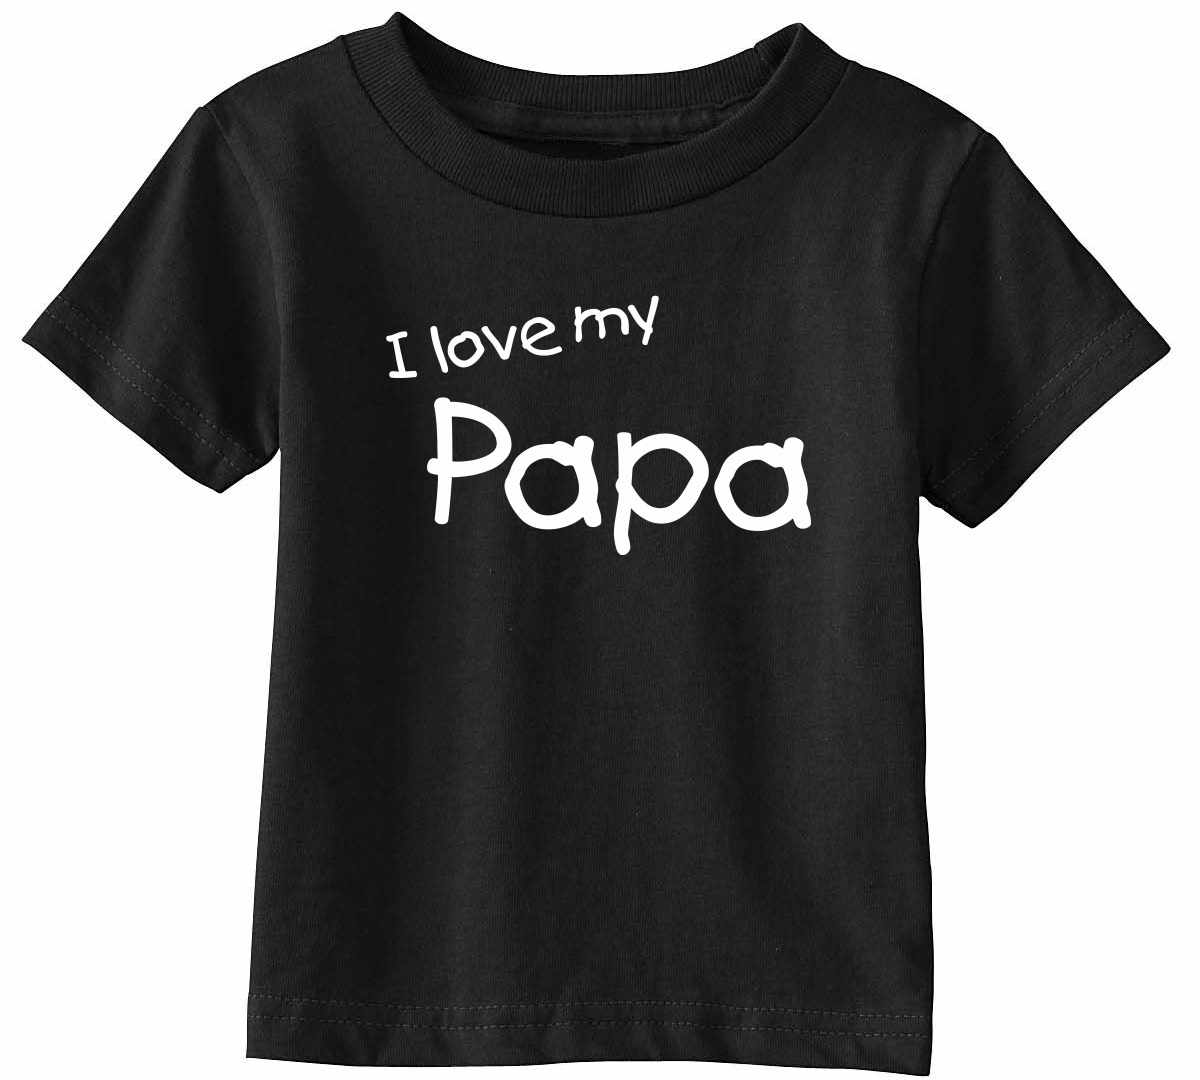 I Love My Papa on Infant-Toddler T-Shirt